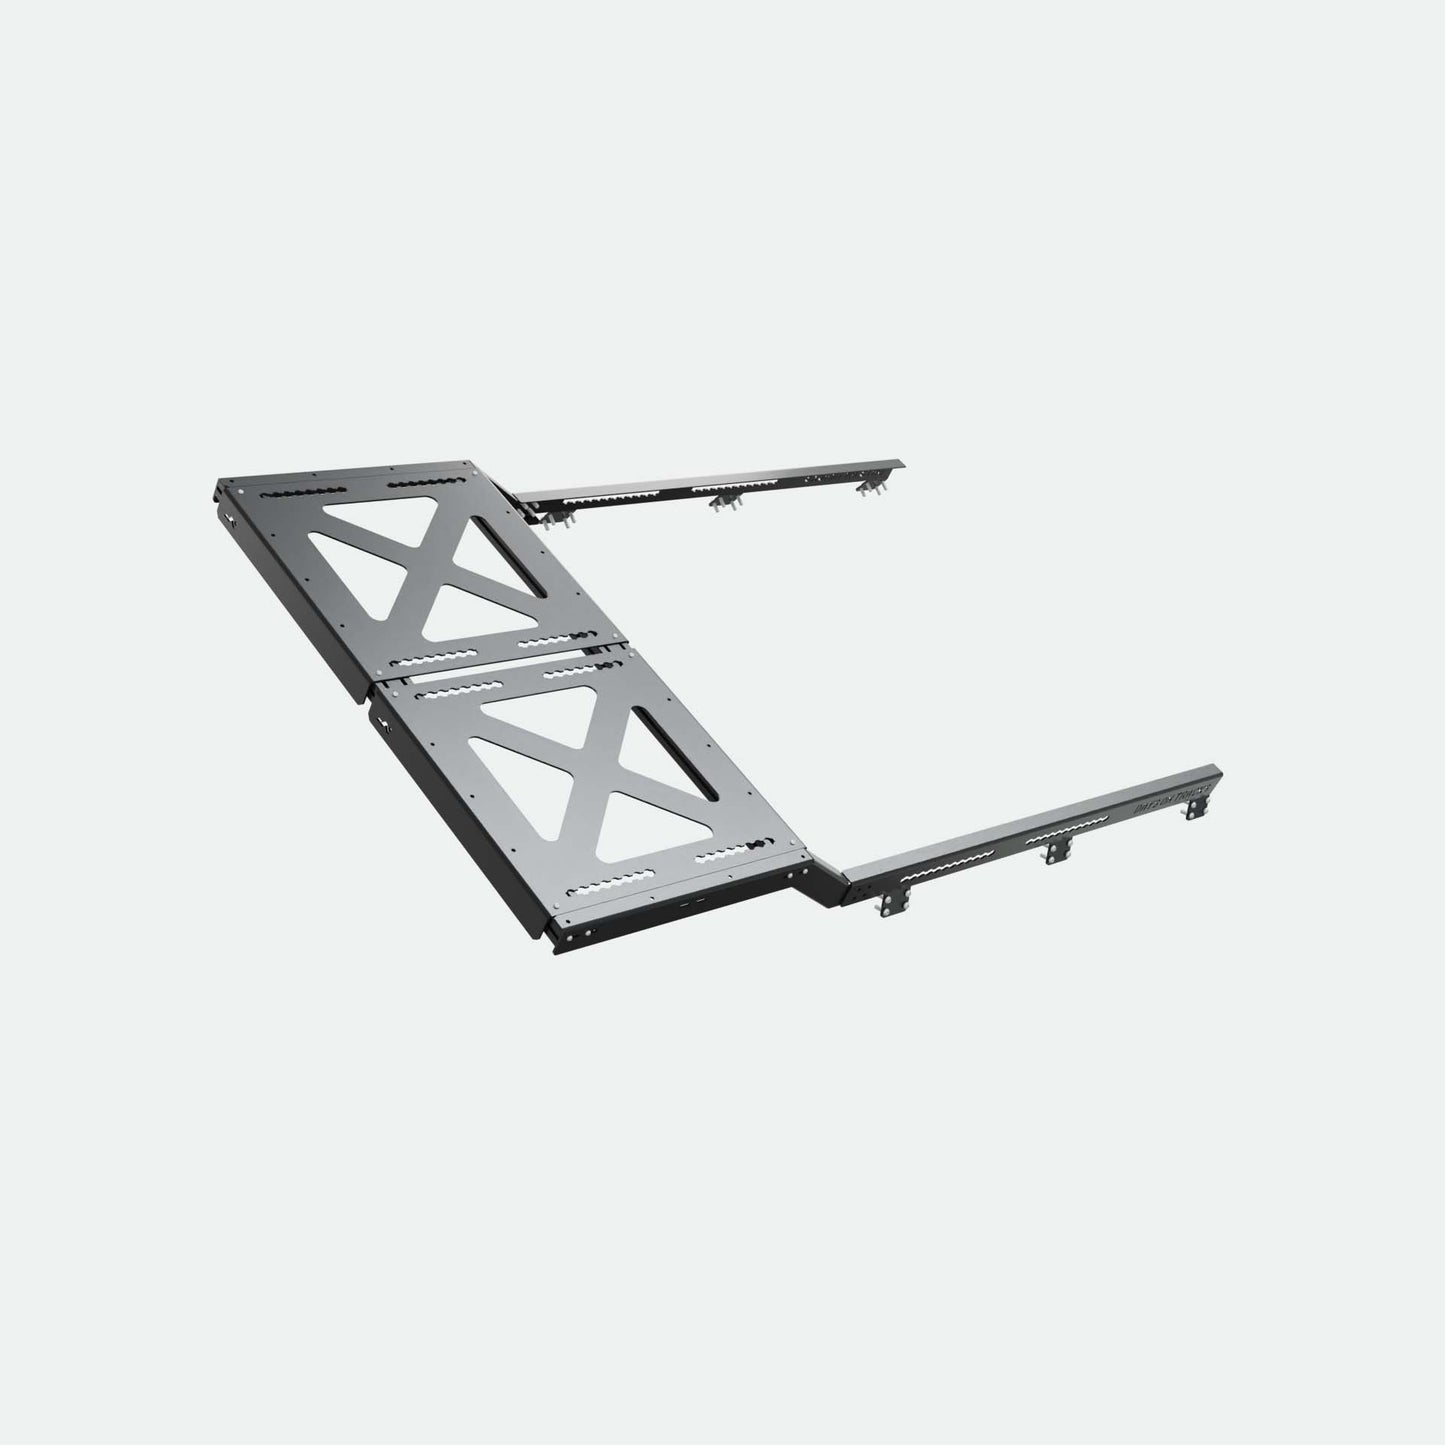 Rendering of extension for bed rack for pick up trucks